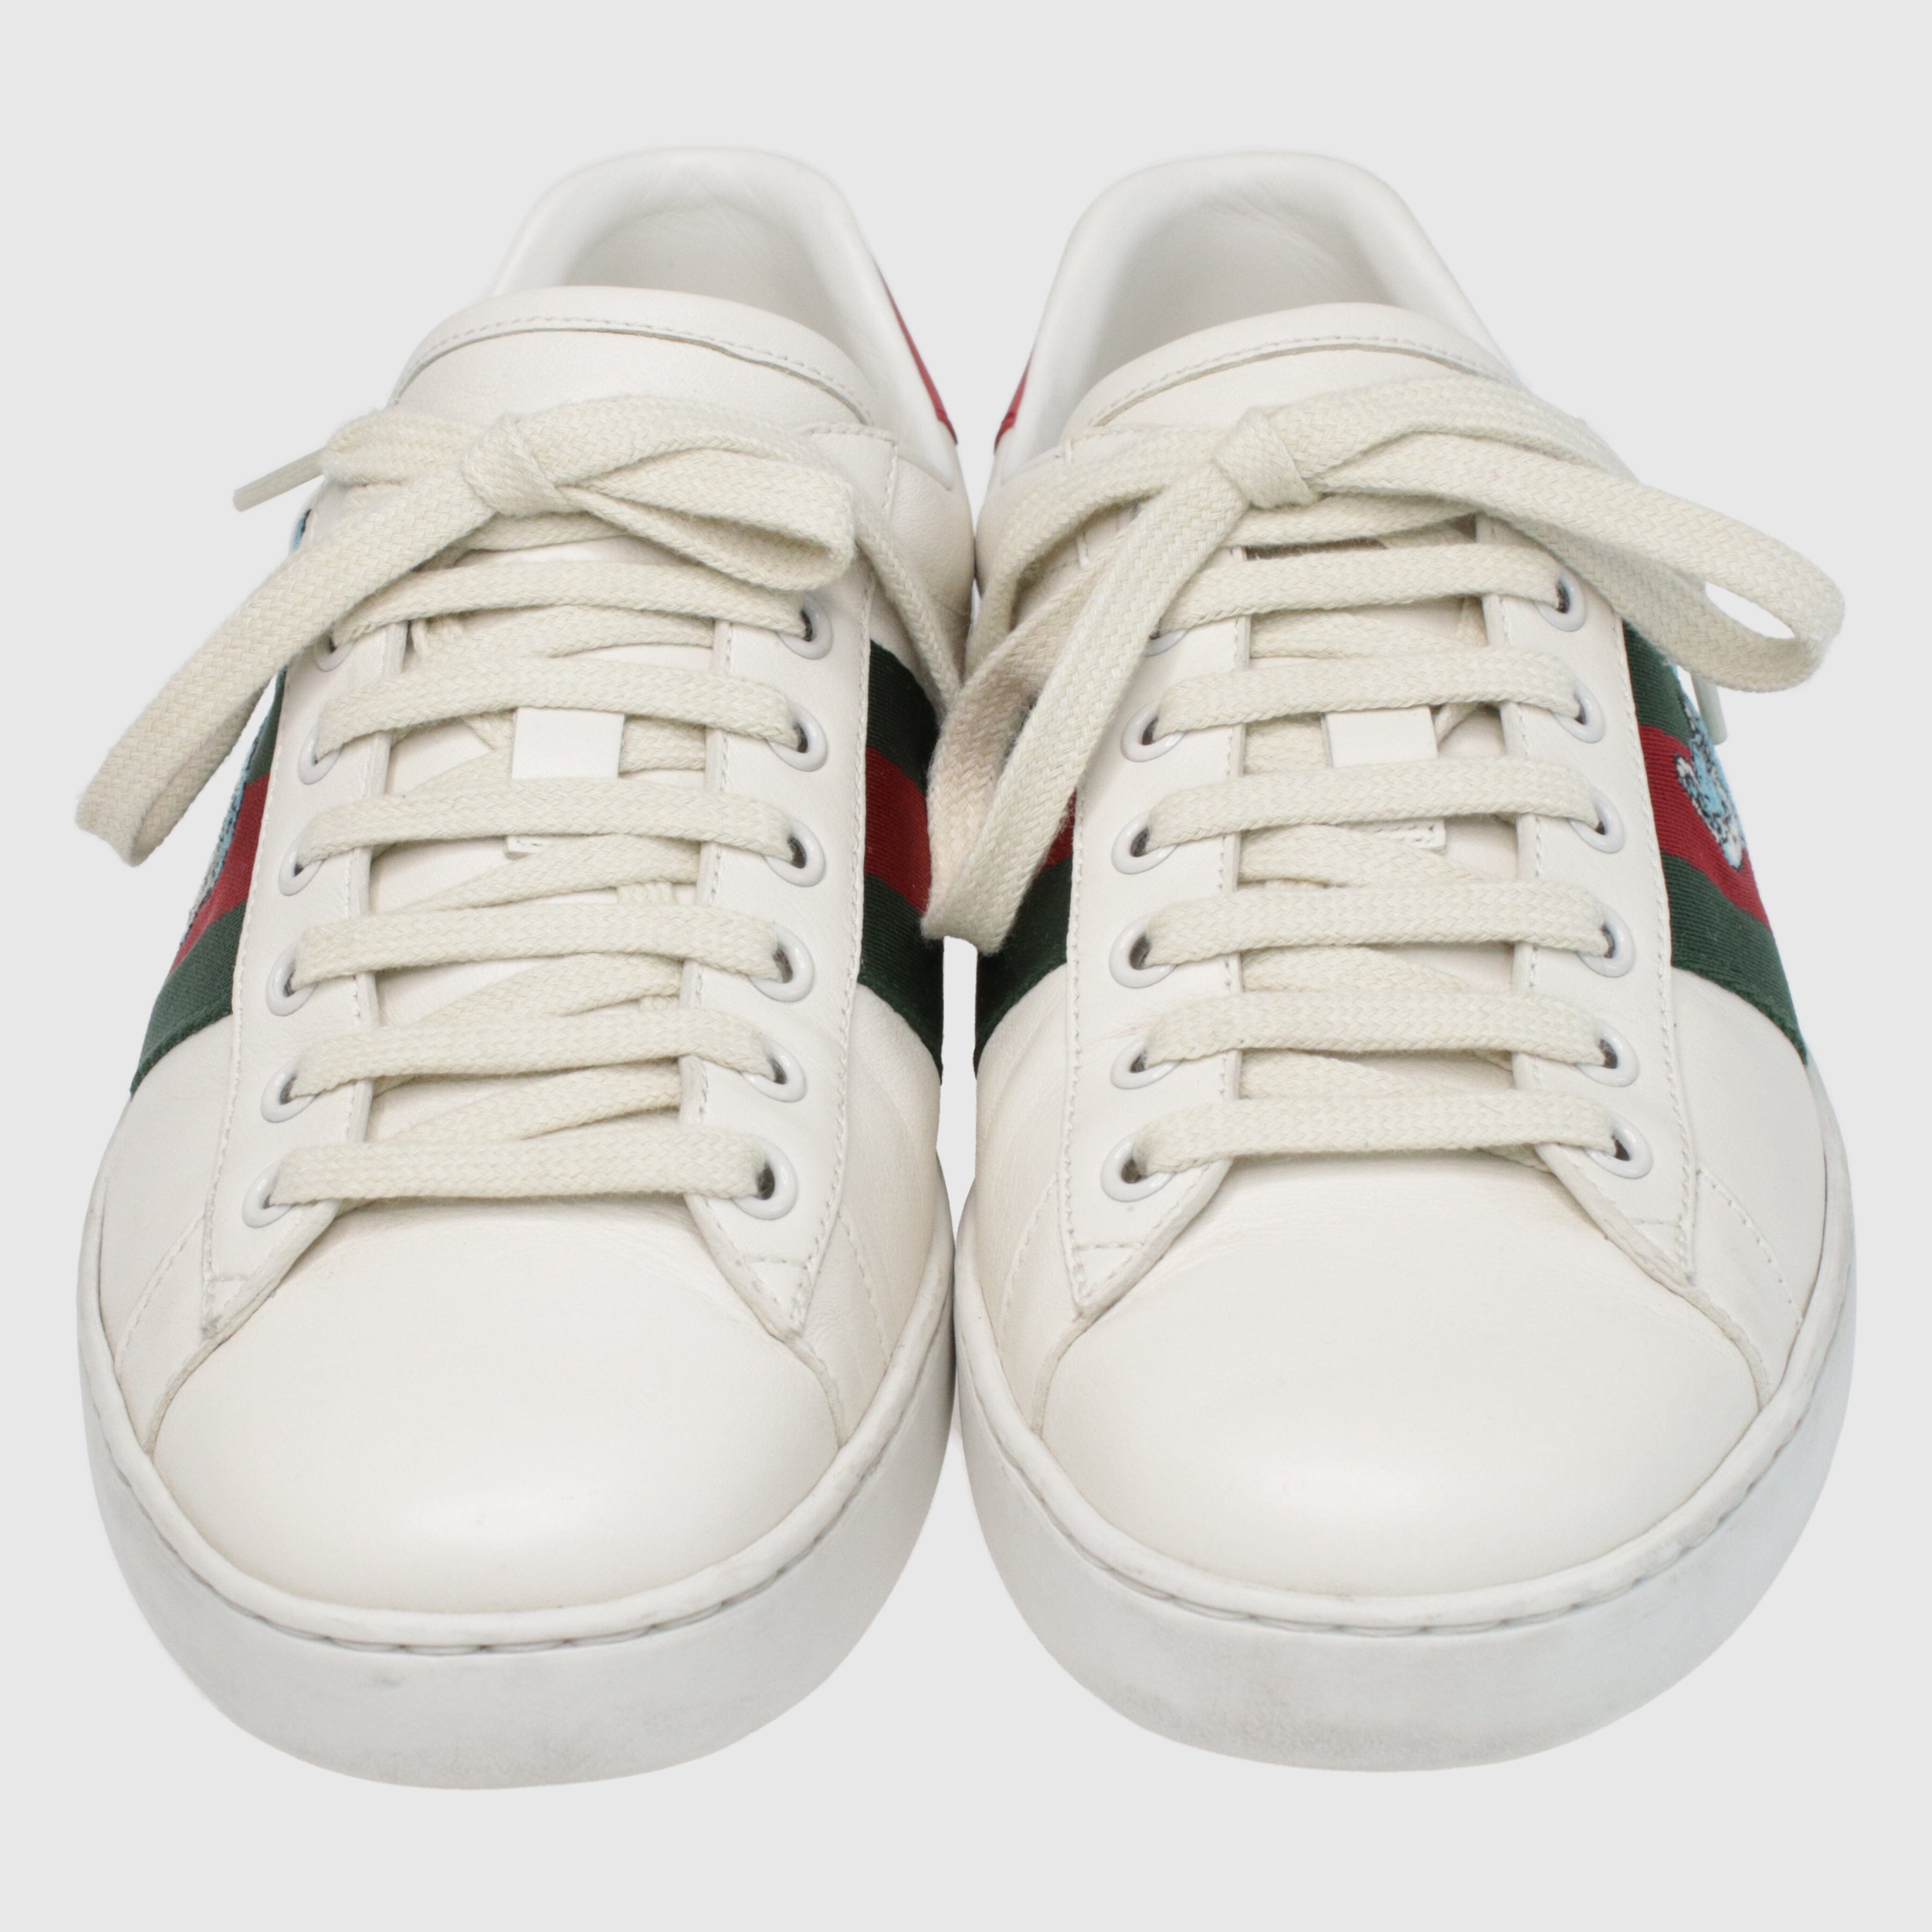 White/Red Web Stripe Ace Creature Embroidered Low Top Sneakers Shoes Gucci x Freya Hartas